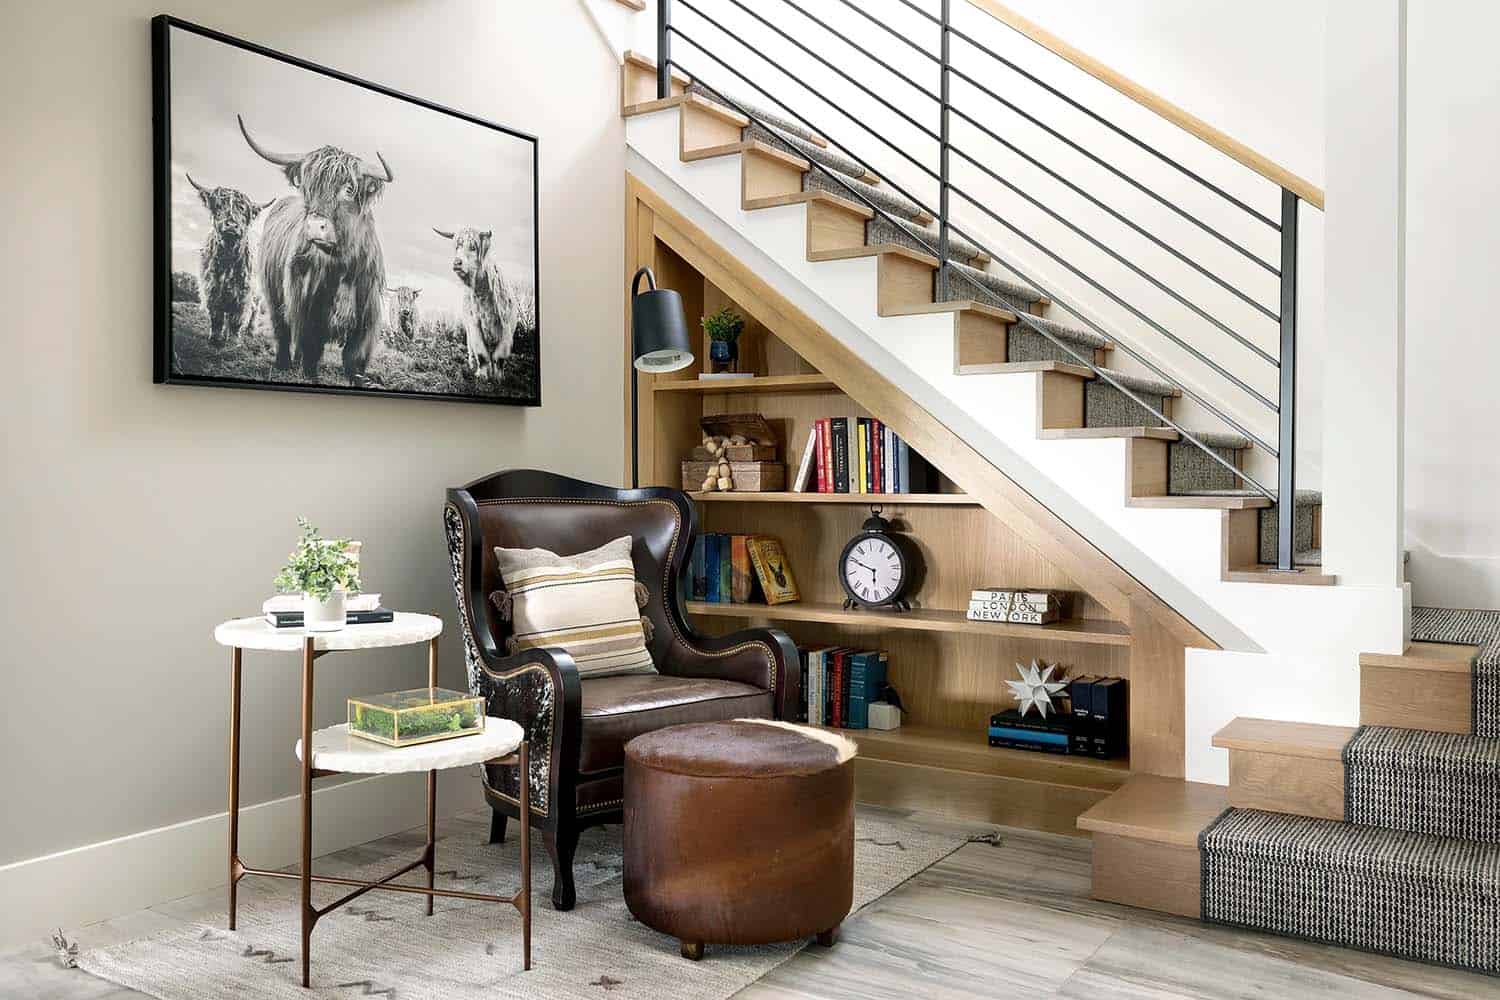 rustic staircase with an integrated bookcase leading into the basement level